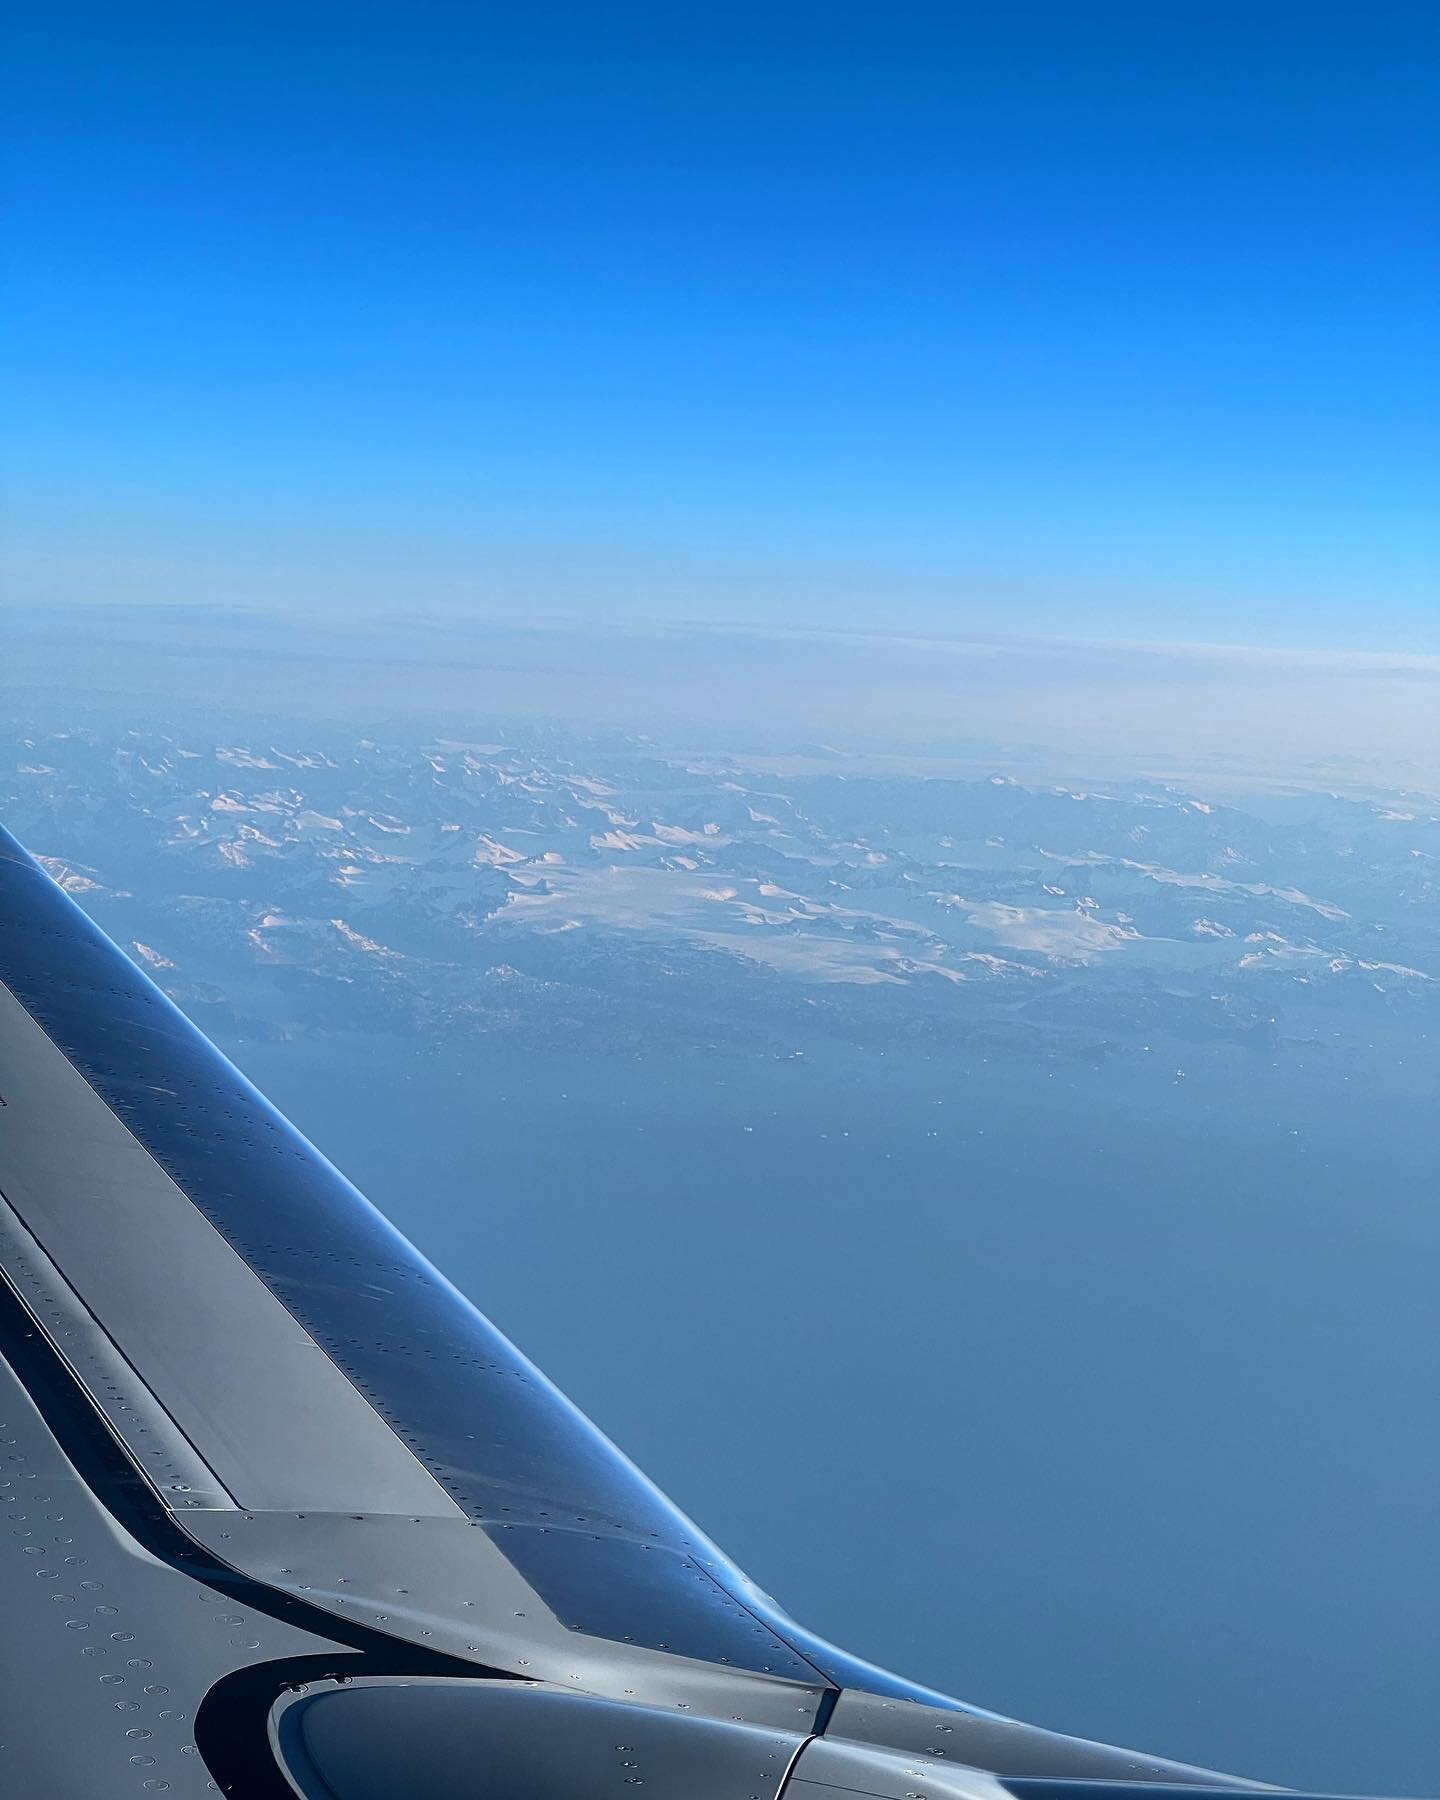 The southern tip of Greenland from the clouds. #greenland